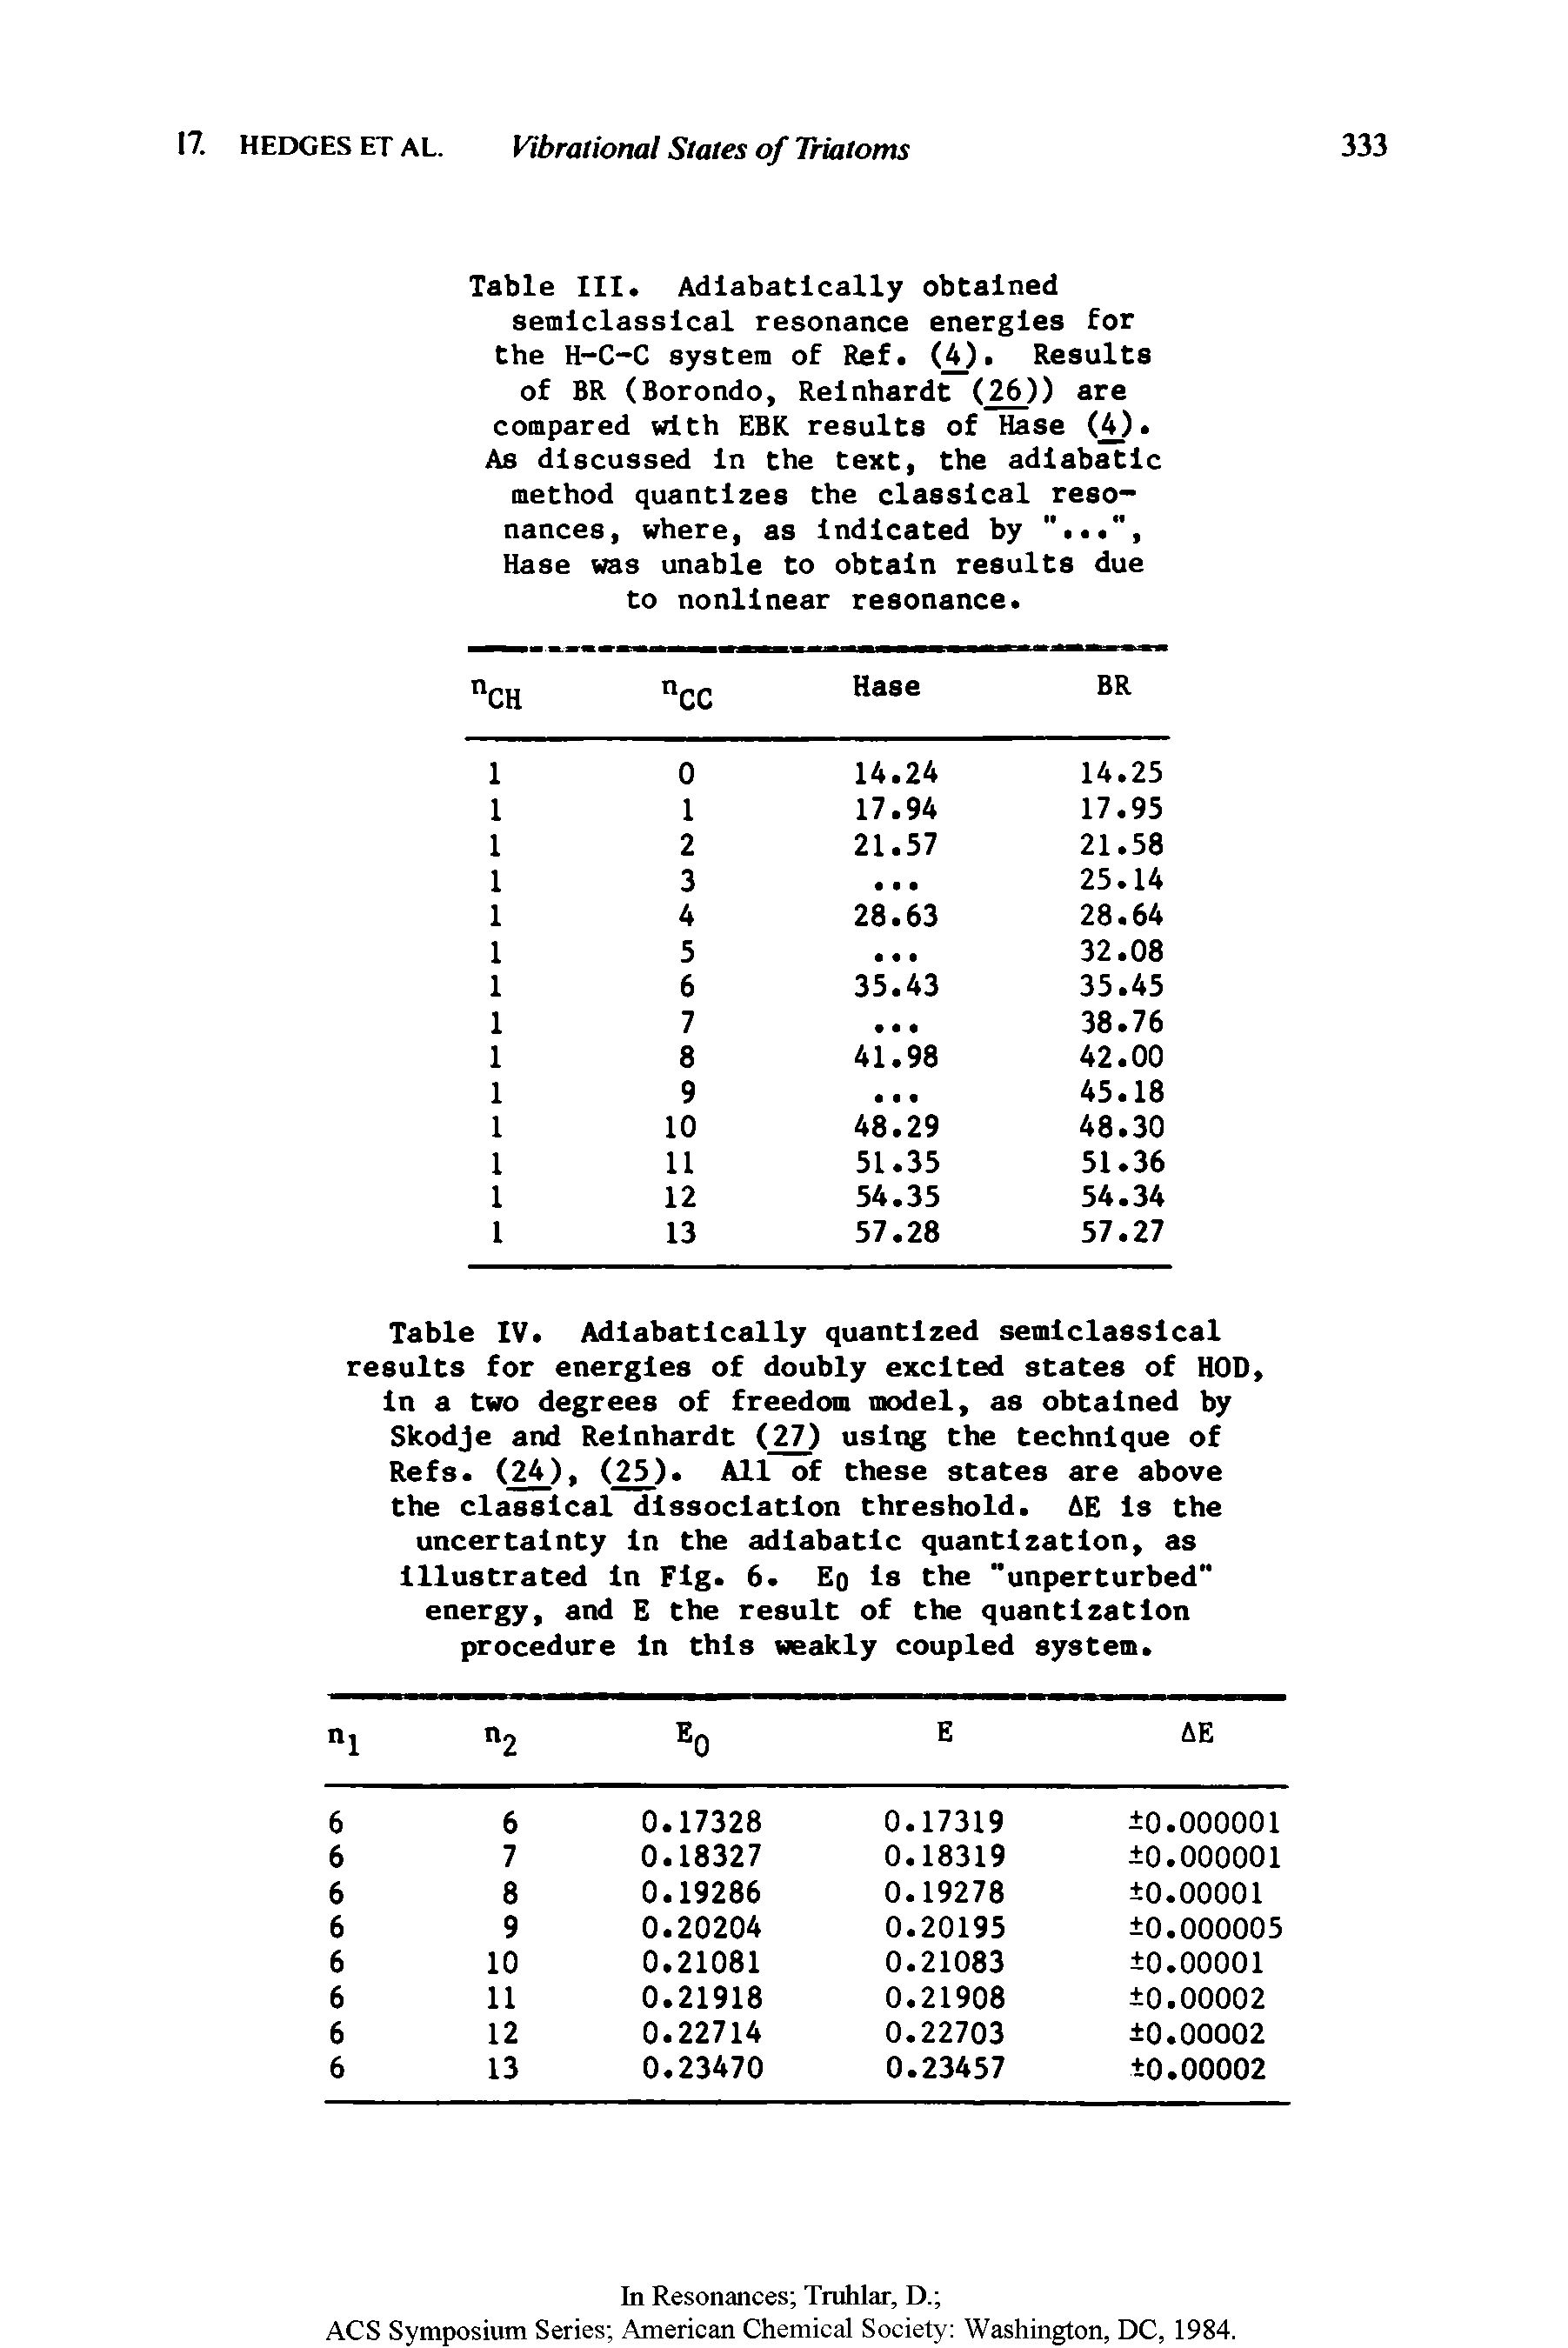 Table III. Adlabatlcally obtained semlclasslcal resonance energies for the H-C-C system of Ref. (O. Results of BR (Borondo, Reinhardt (26)) are compared with EBK results of Hase (O. As discussed In the text, the adiabatic method quantizes the classical resonances, where, as Indicated by Hase was unable to obtain results due to nonlinear resonance.